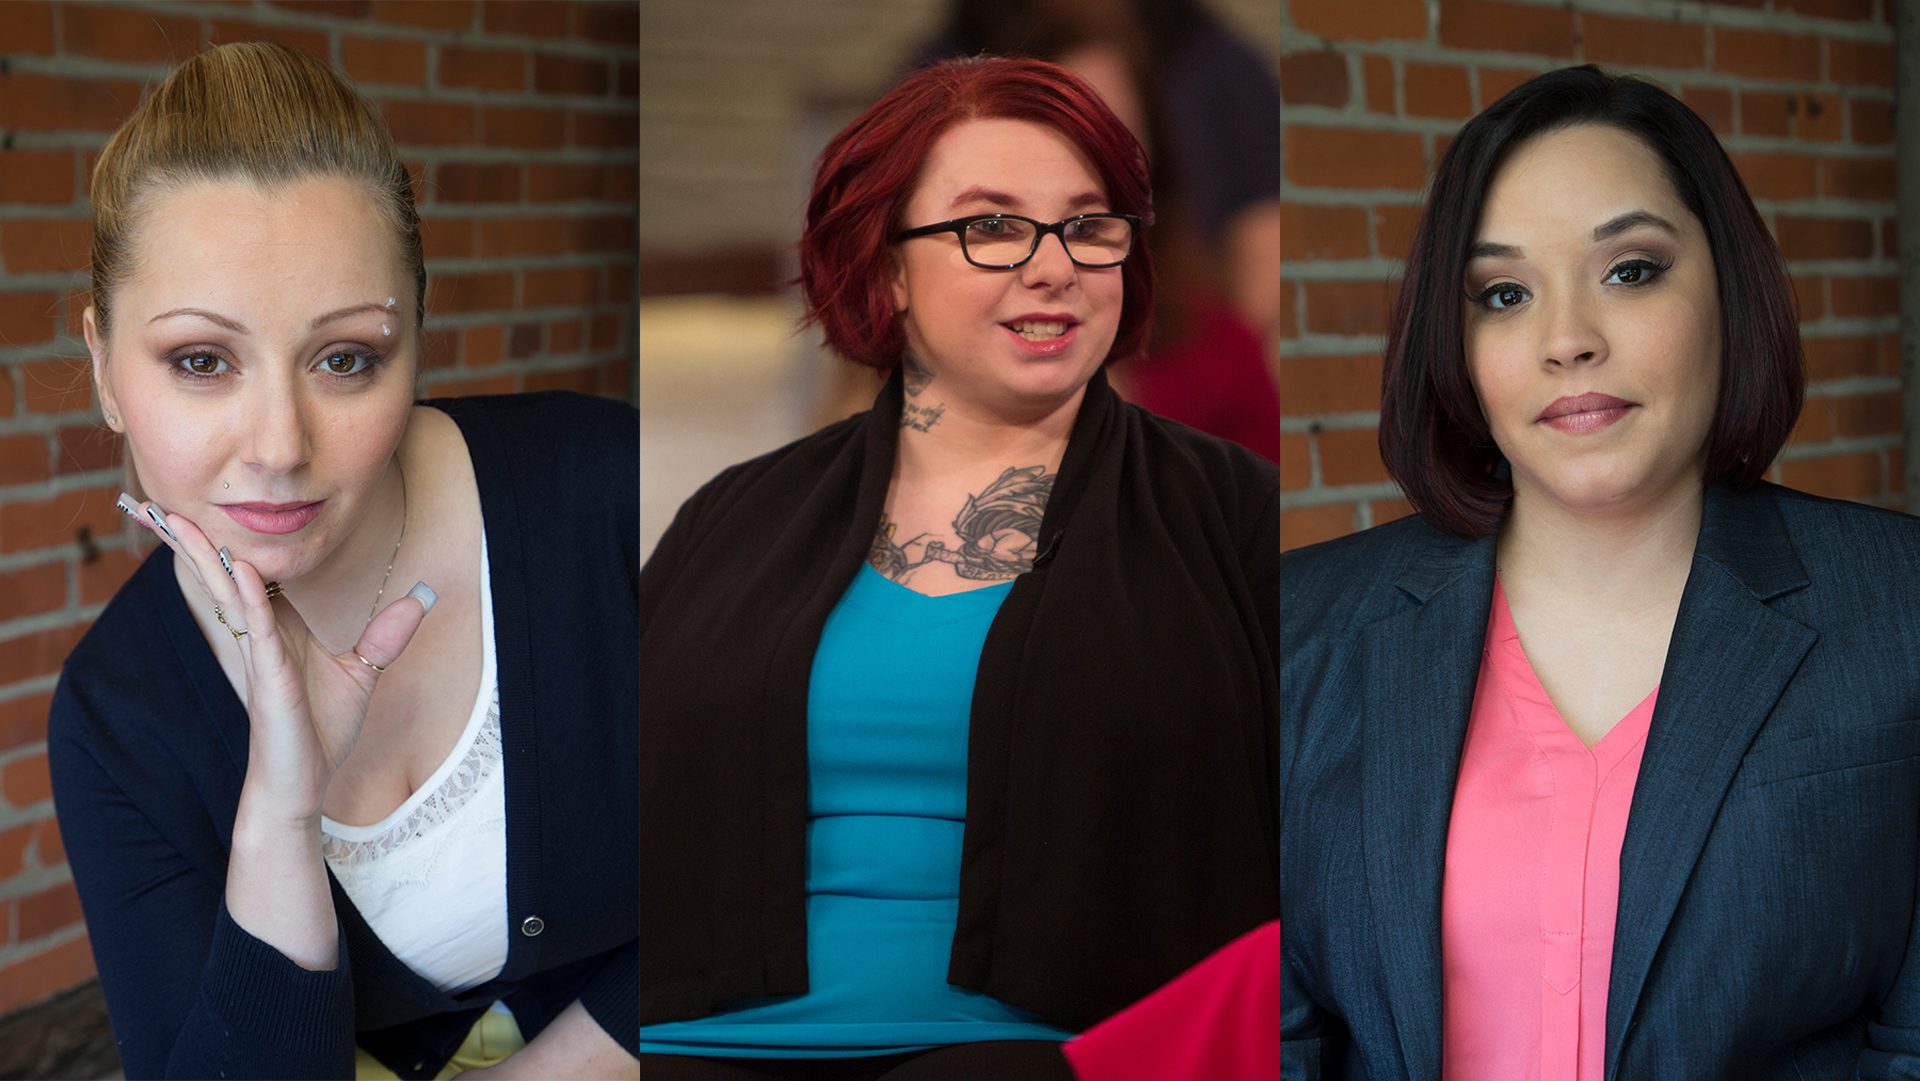 What Happened to Gina DeJesus, Amanda Berry and Michelle Knight After They Escaped from Captor Ariel Castro?